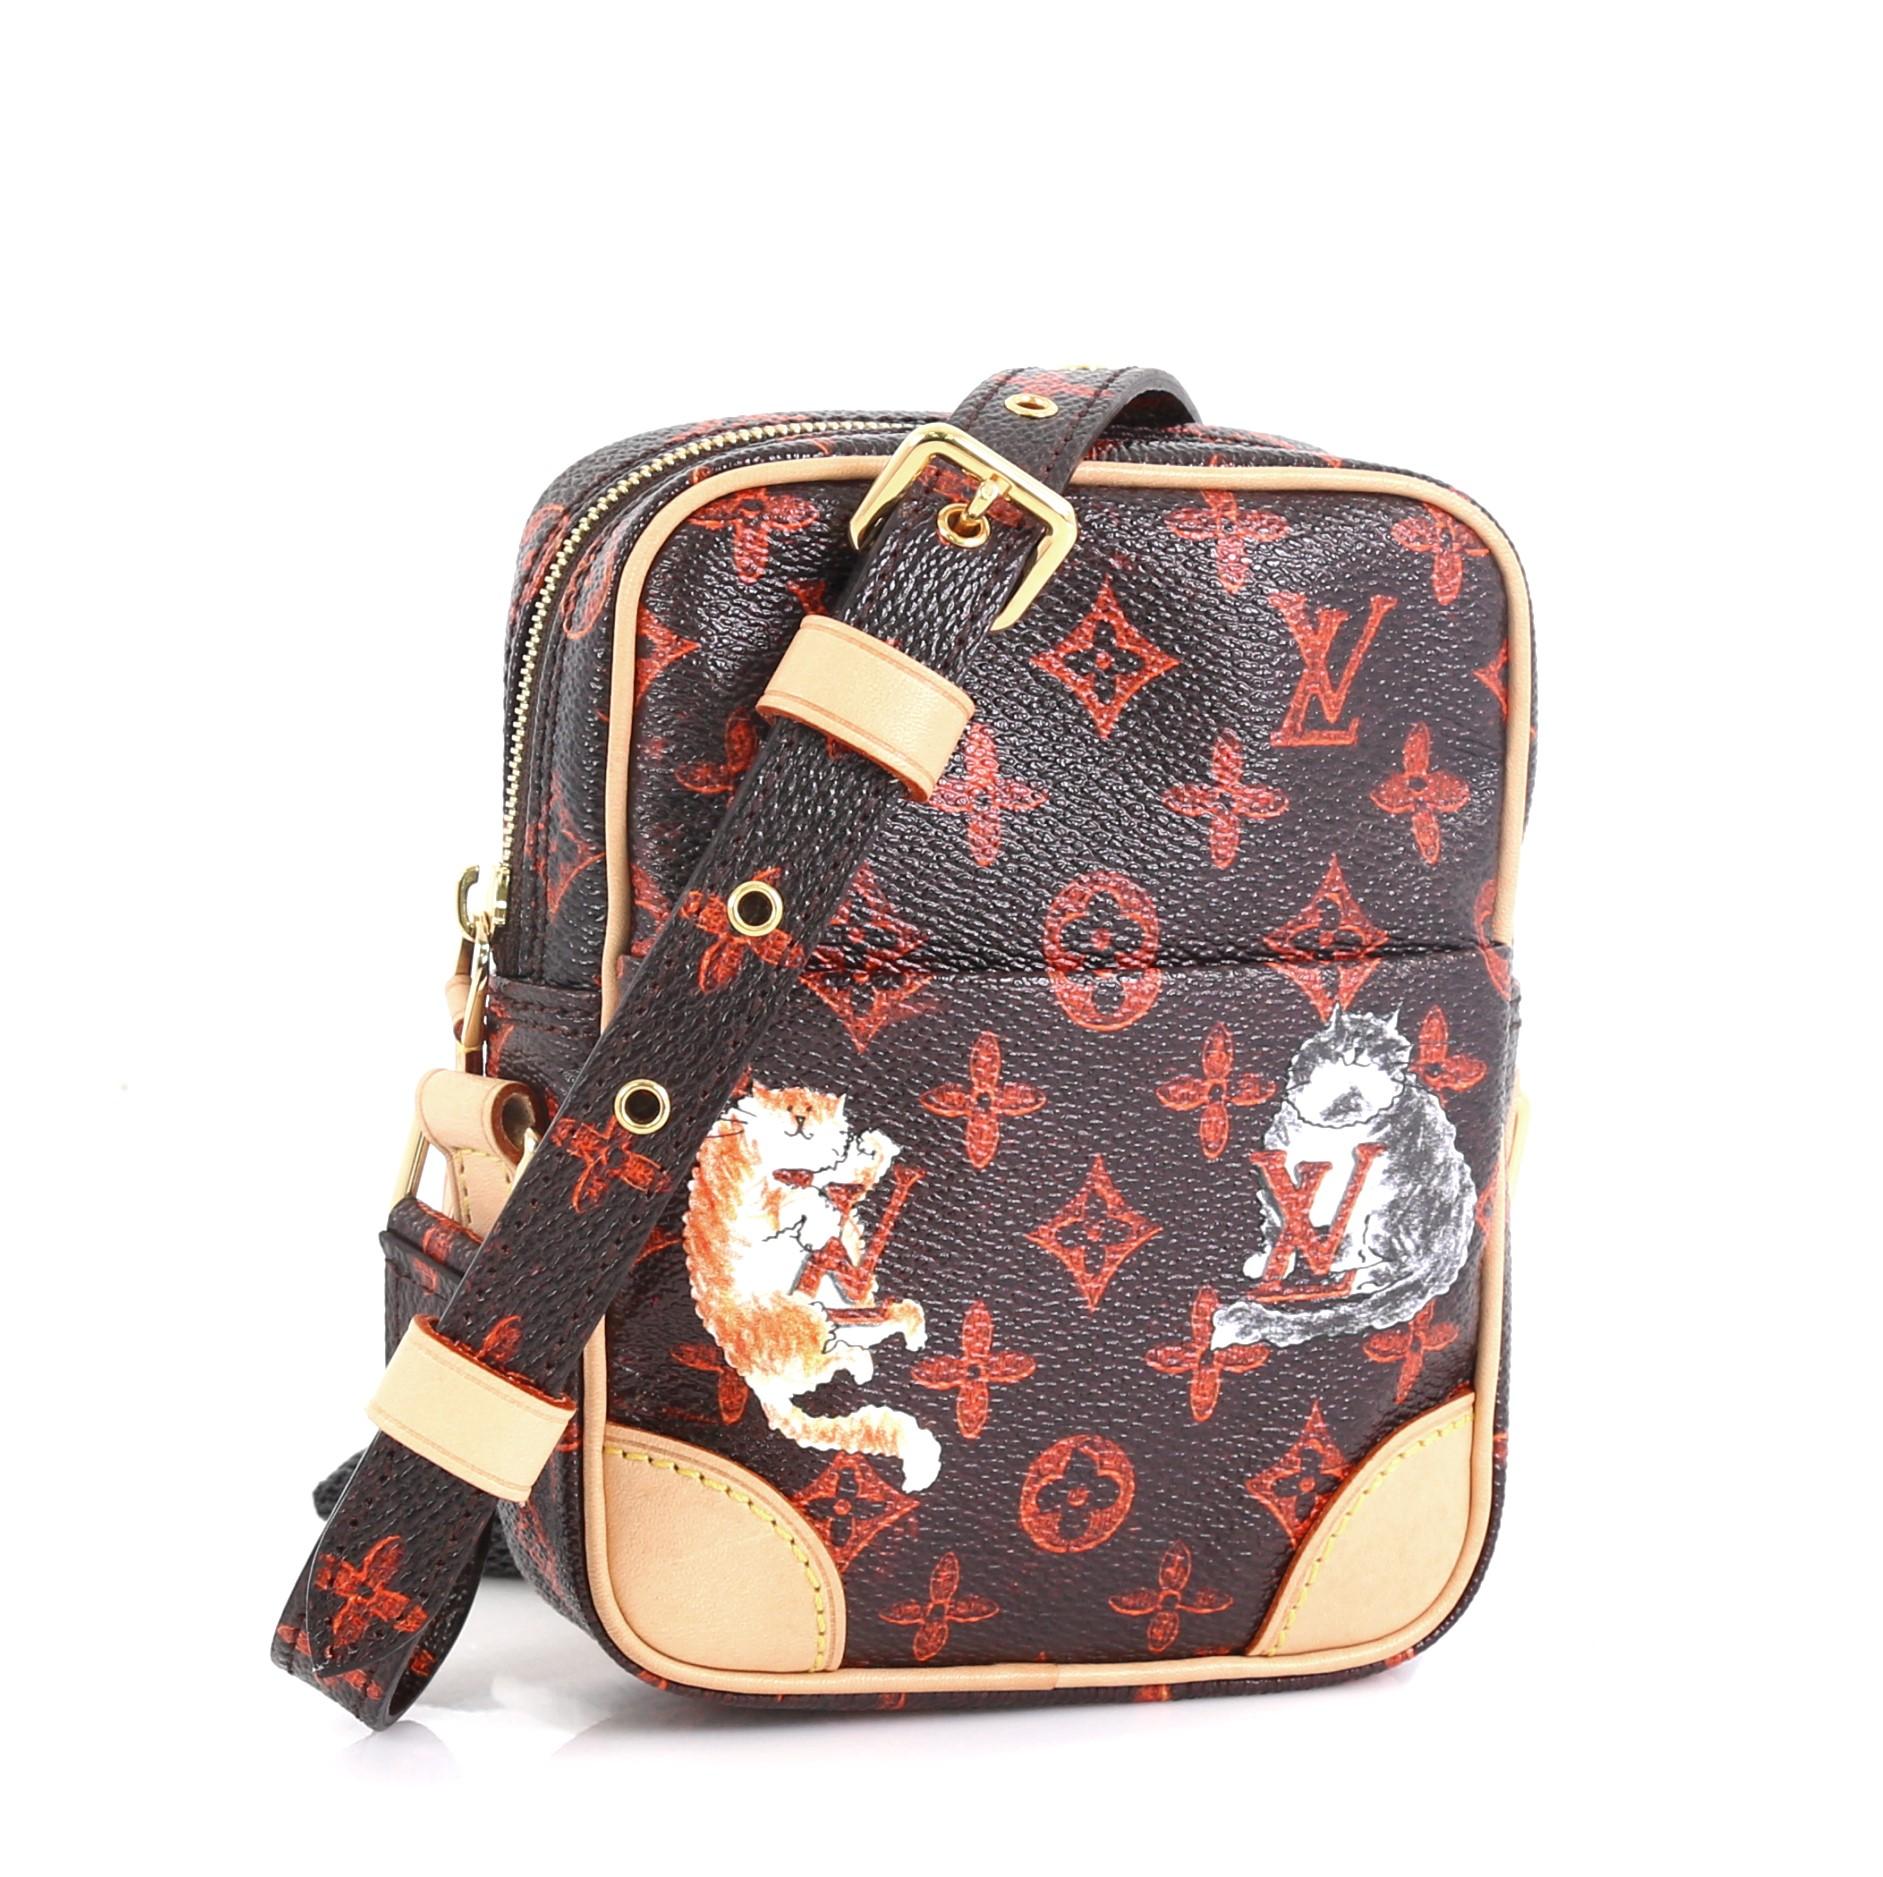 This Louis Vuitton Paname Bag Limited Edition Grace Coddington Catogram Canvas, crafted in orange and brown monogram coated canvas, features a crossbody strap, silk-screened playful cats and dogs, and gold-tone hardware. Its zip closure opens to an